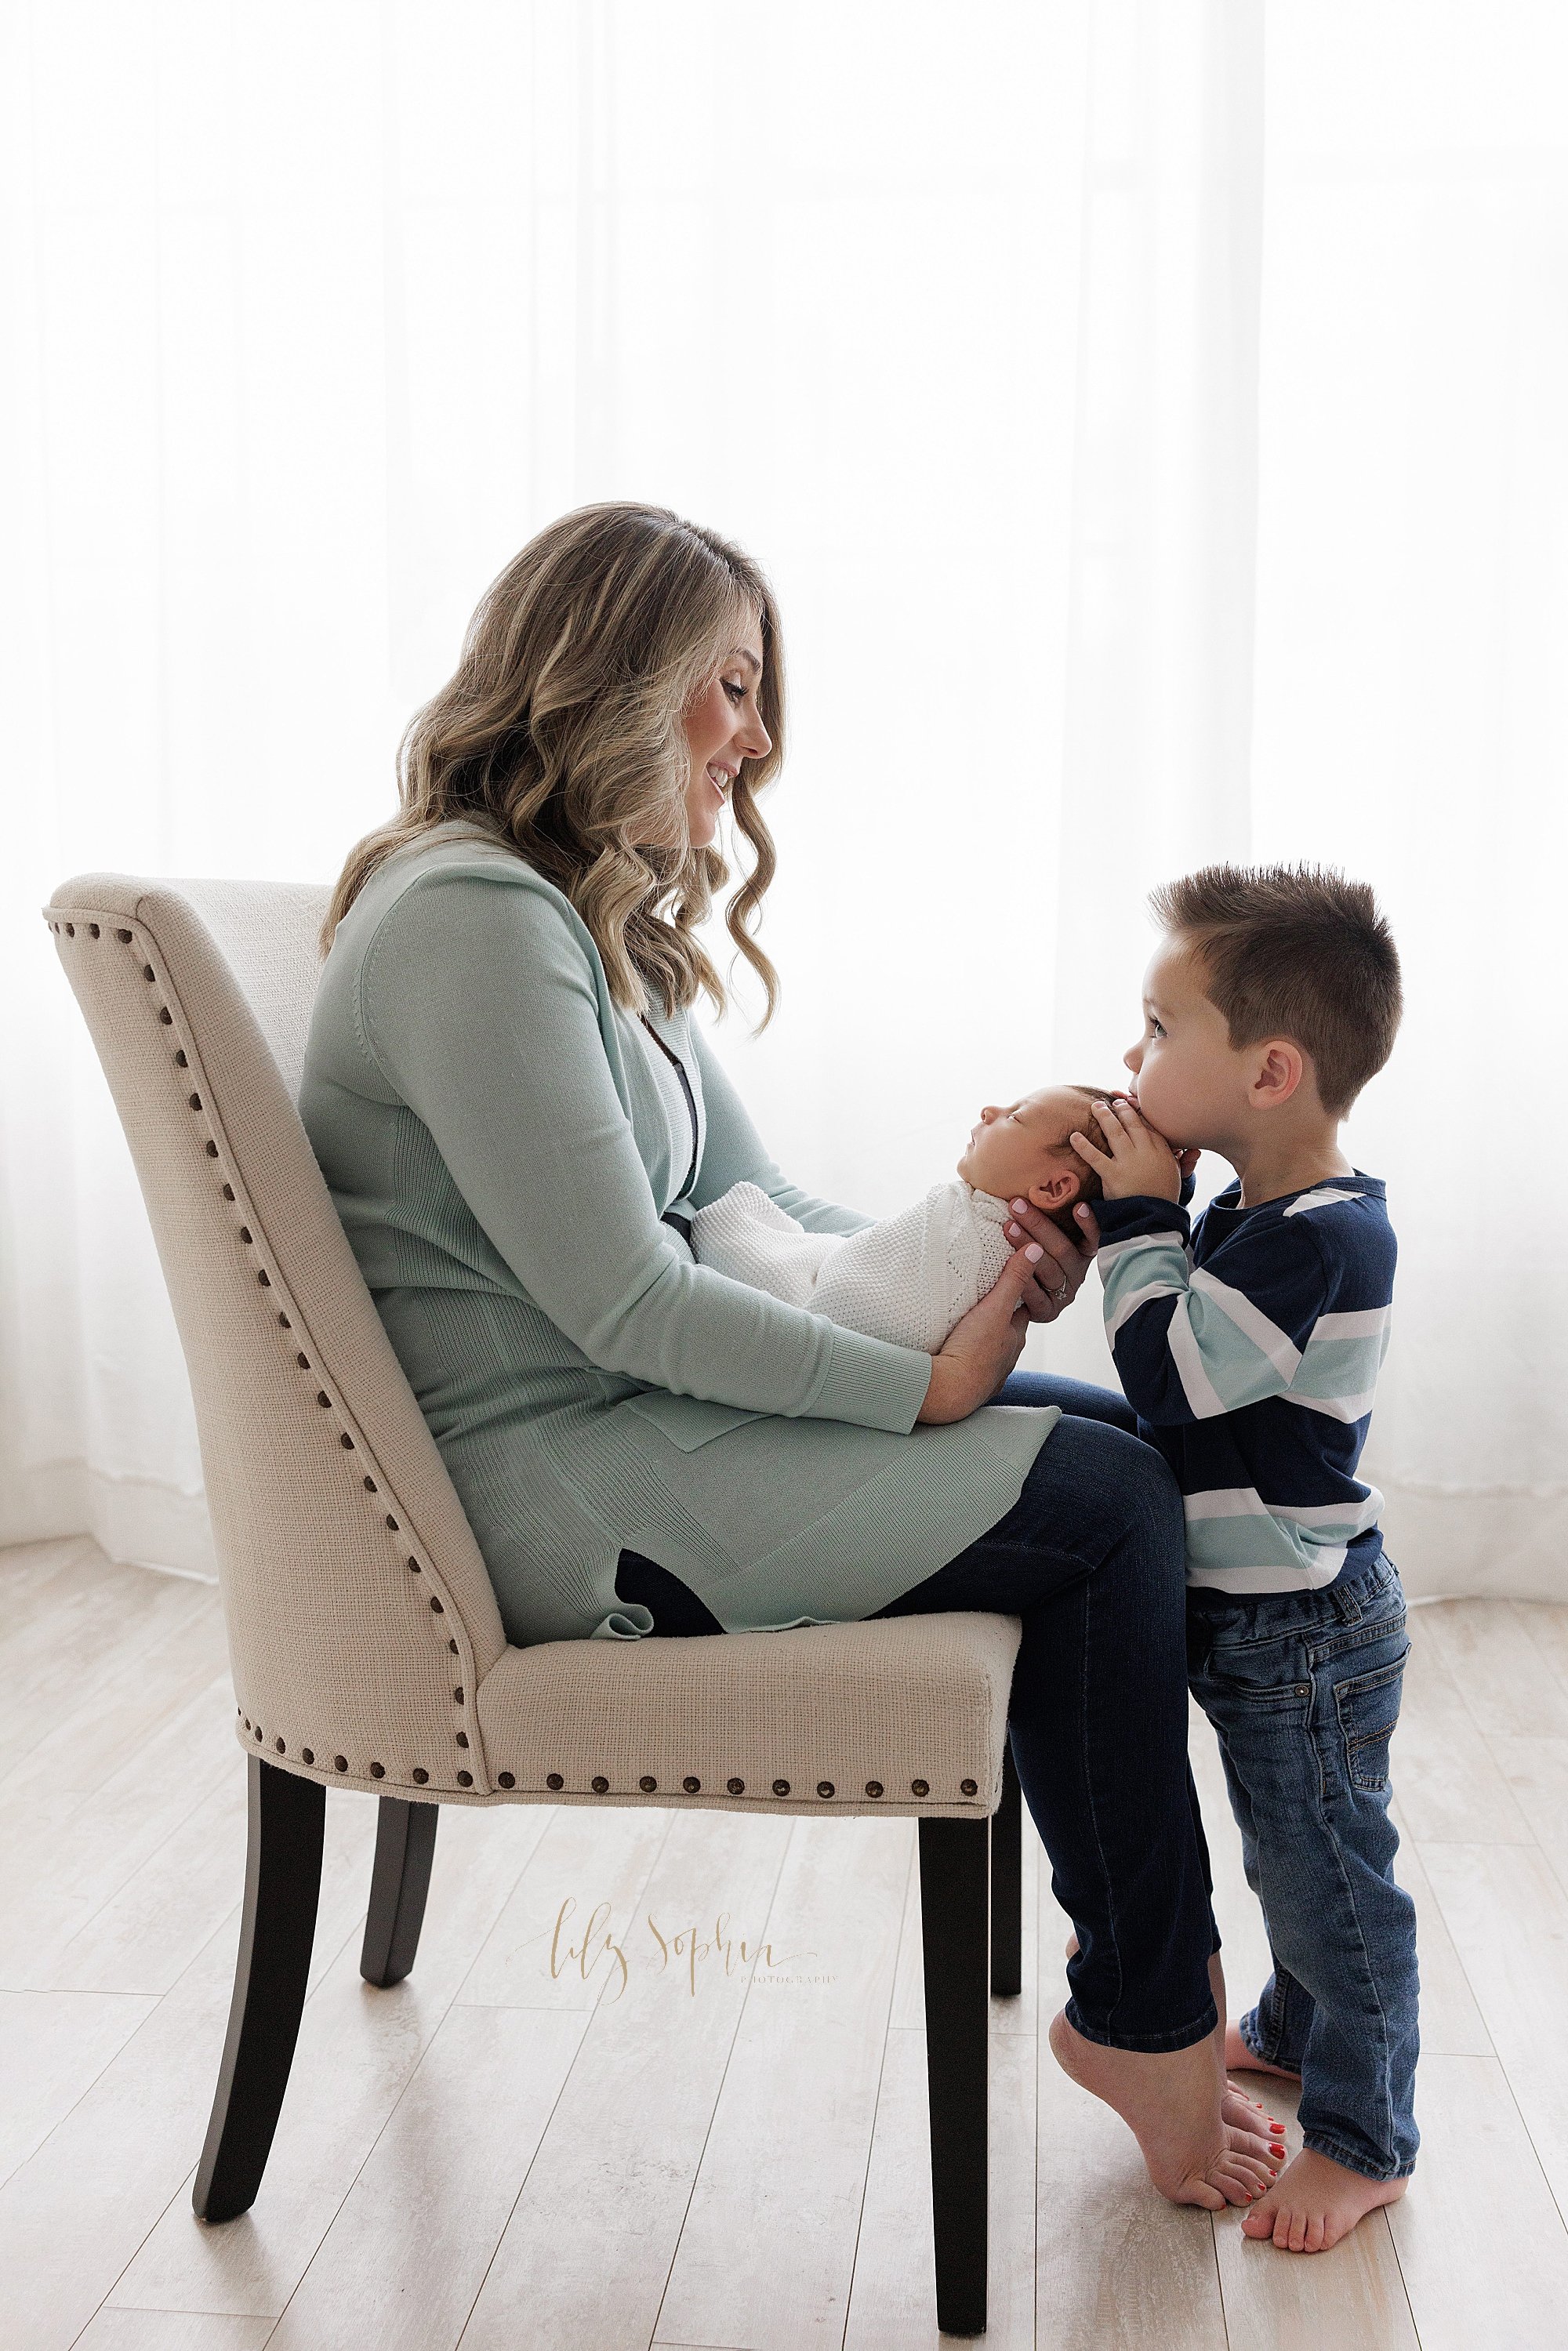  Newborn family portrait of a mother sitting in an upholstered chair with her newborn son on her lap as her young son stands facing her, holds his brother’s head in his hands and rests his head on the crown of the newborn boy taken in front of a wind